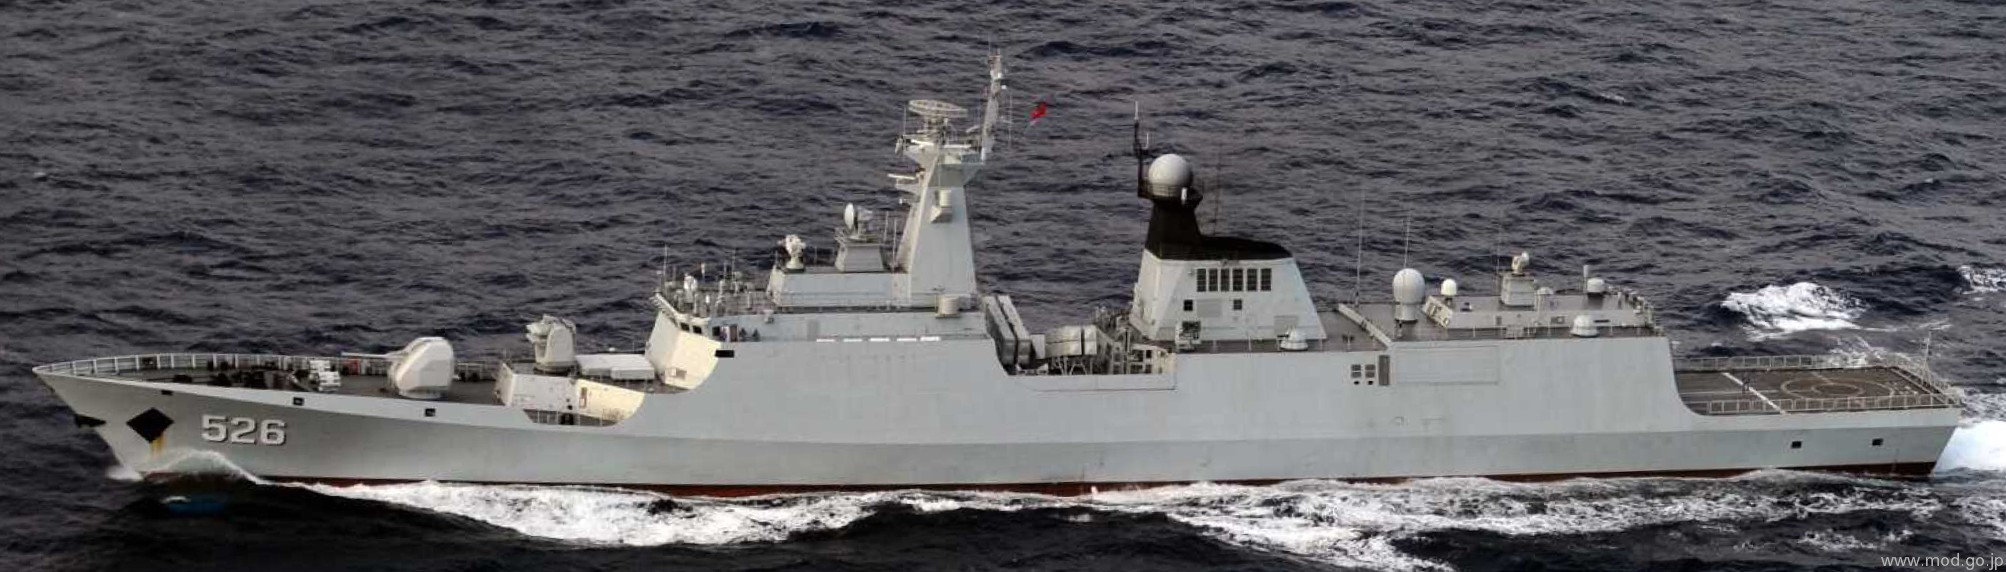 ffg-526 plans wenzhou type 54 jiangkai class guided missile frigate people's liberation army navy china 02